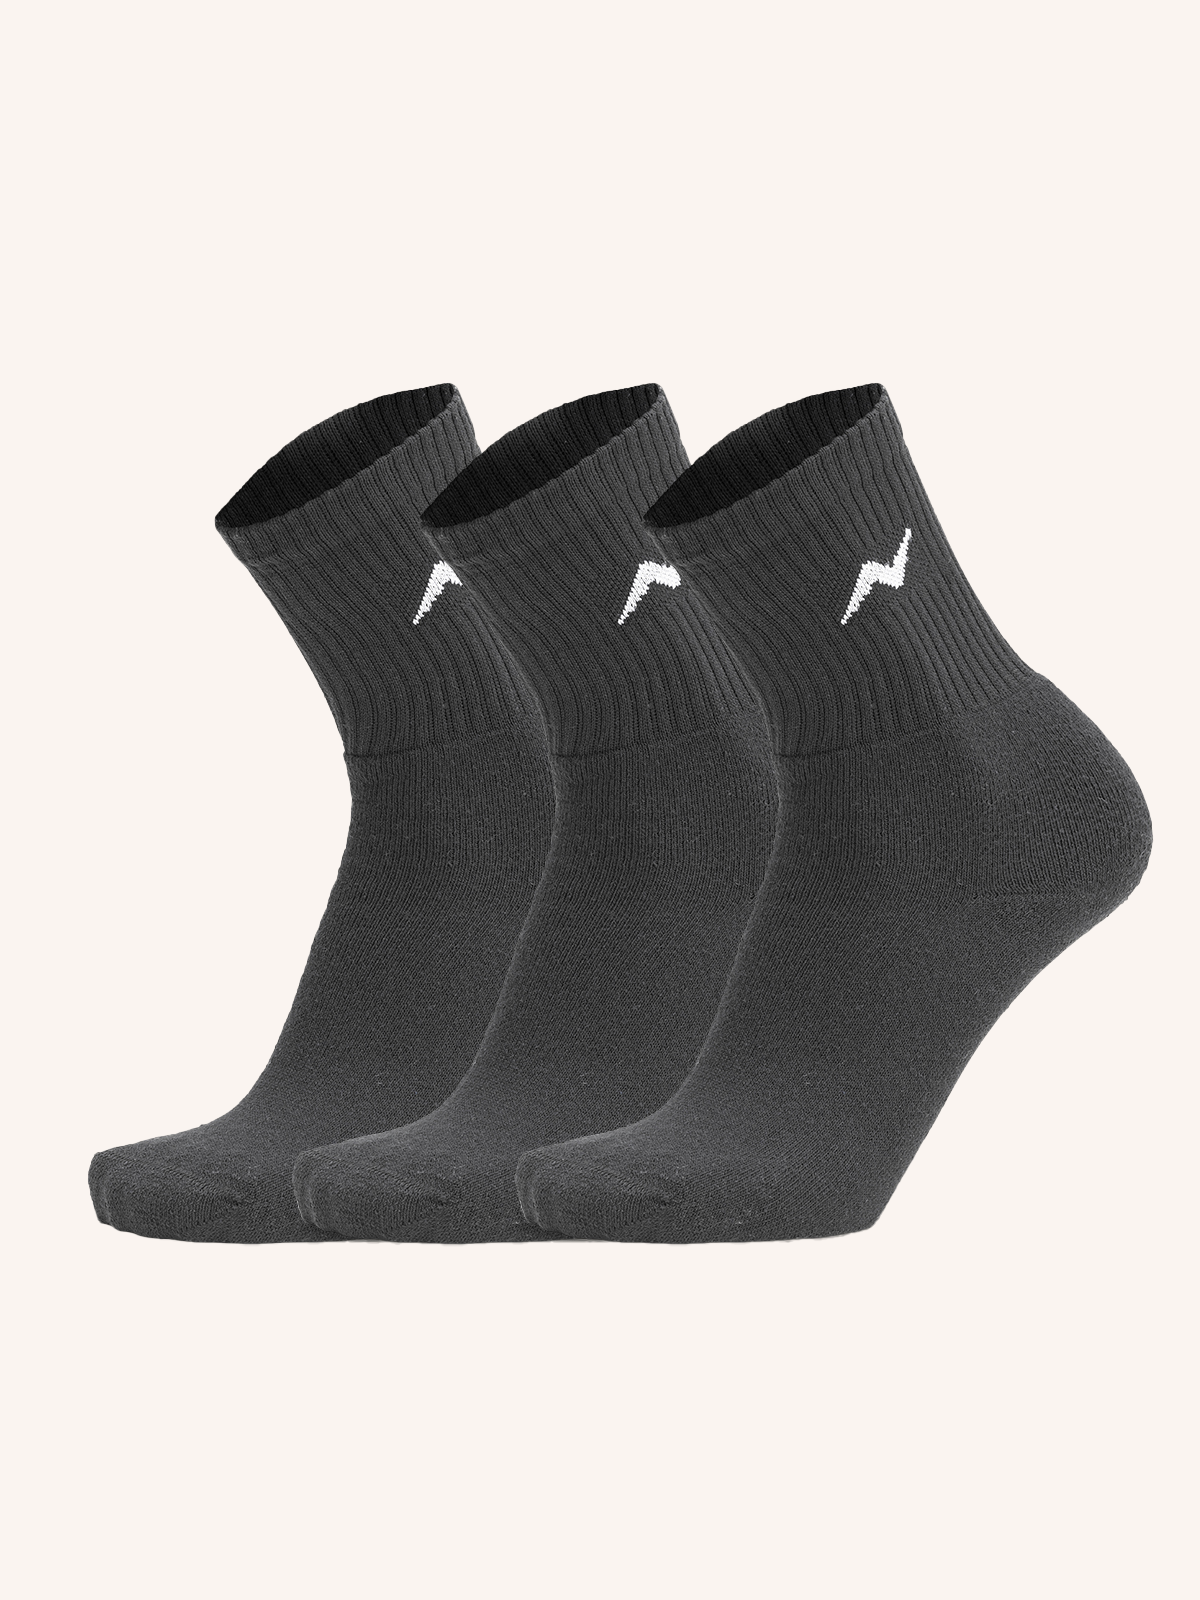 Short Sock in Variable Fabric for Men's Tennis | Plain Color | Pack of 3 Pairs | PRS 01